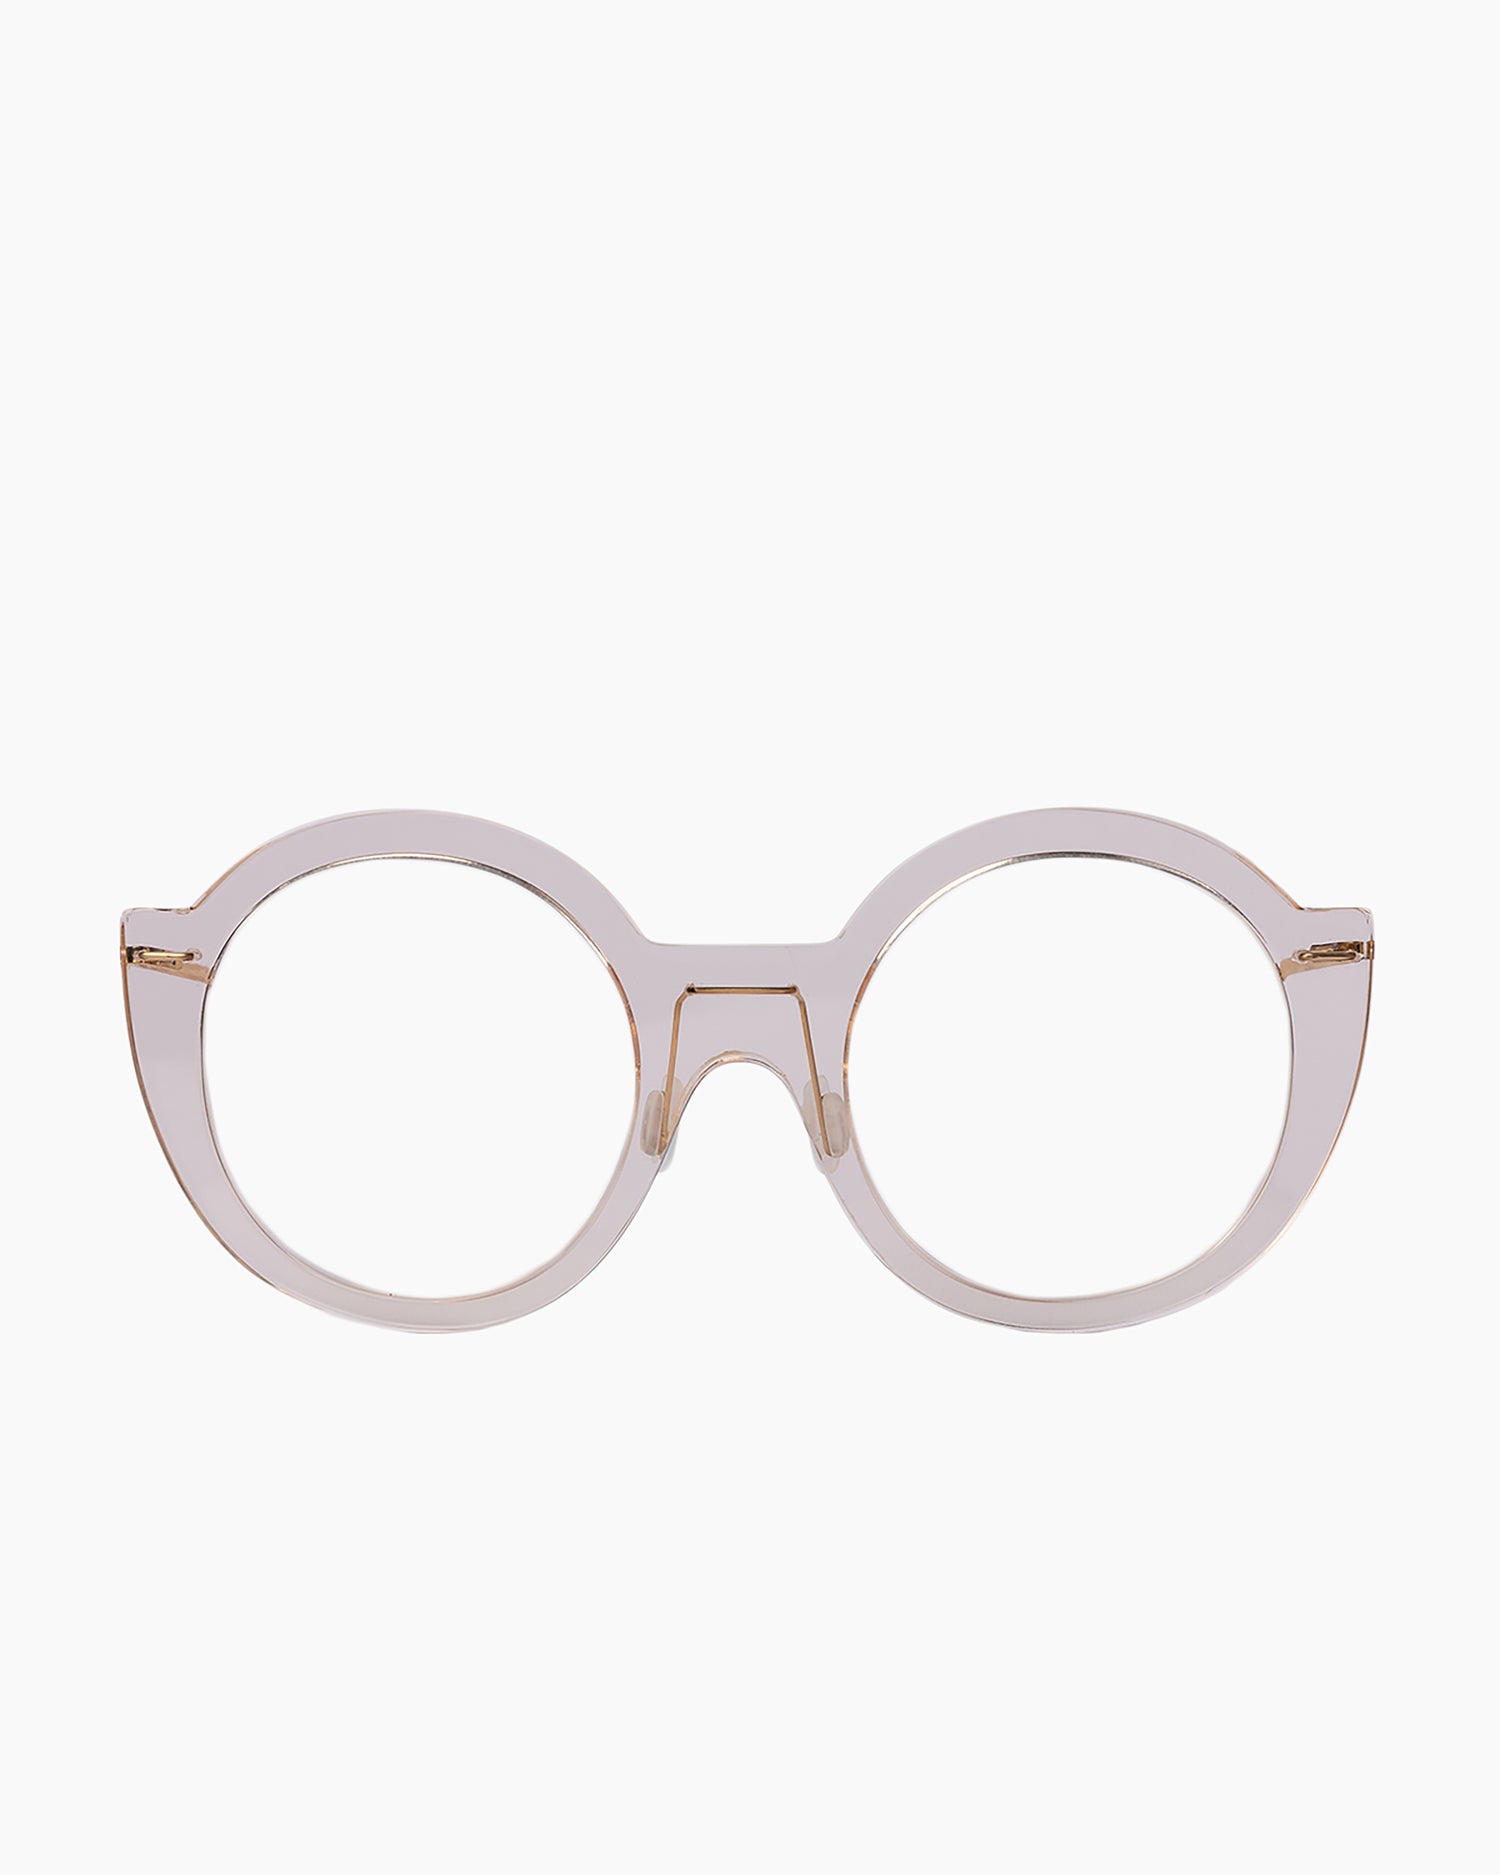 Monogram Marie-Sophie Dion - Coll - Crb | glasses bar:  Marie-Sophie Dion